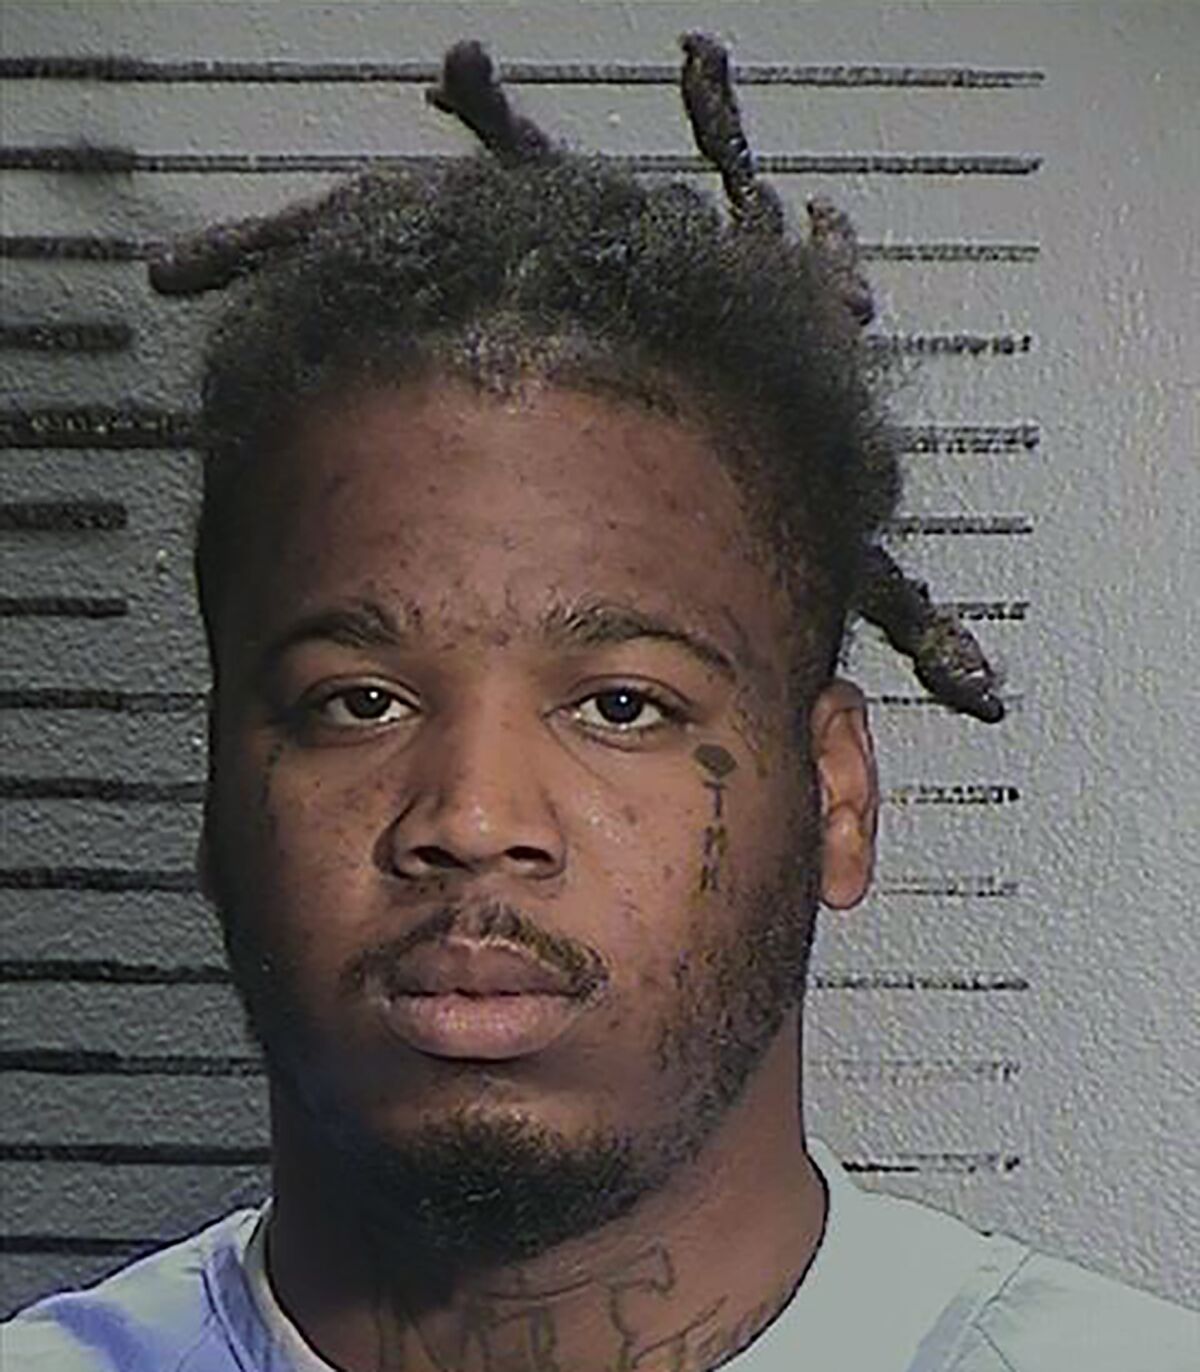 Smiley Martin in a Feb. 6 booking photo.